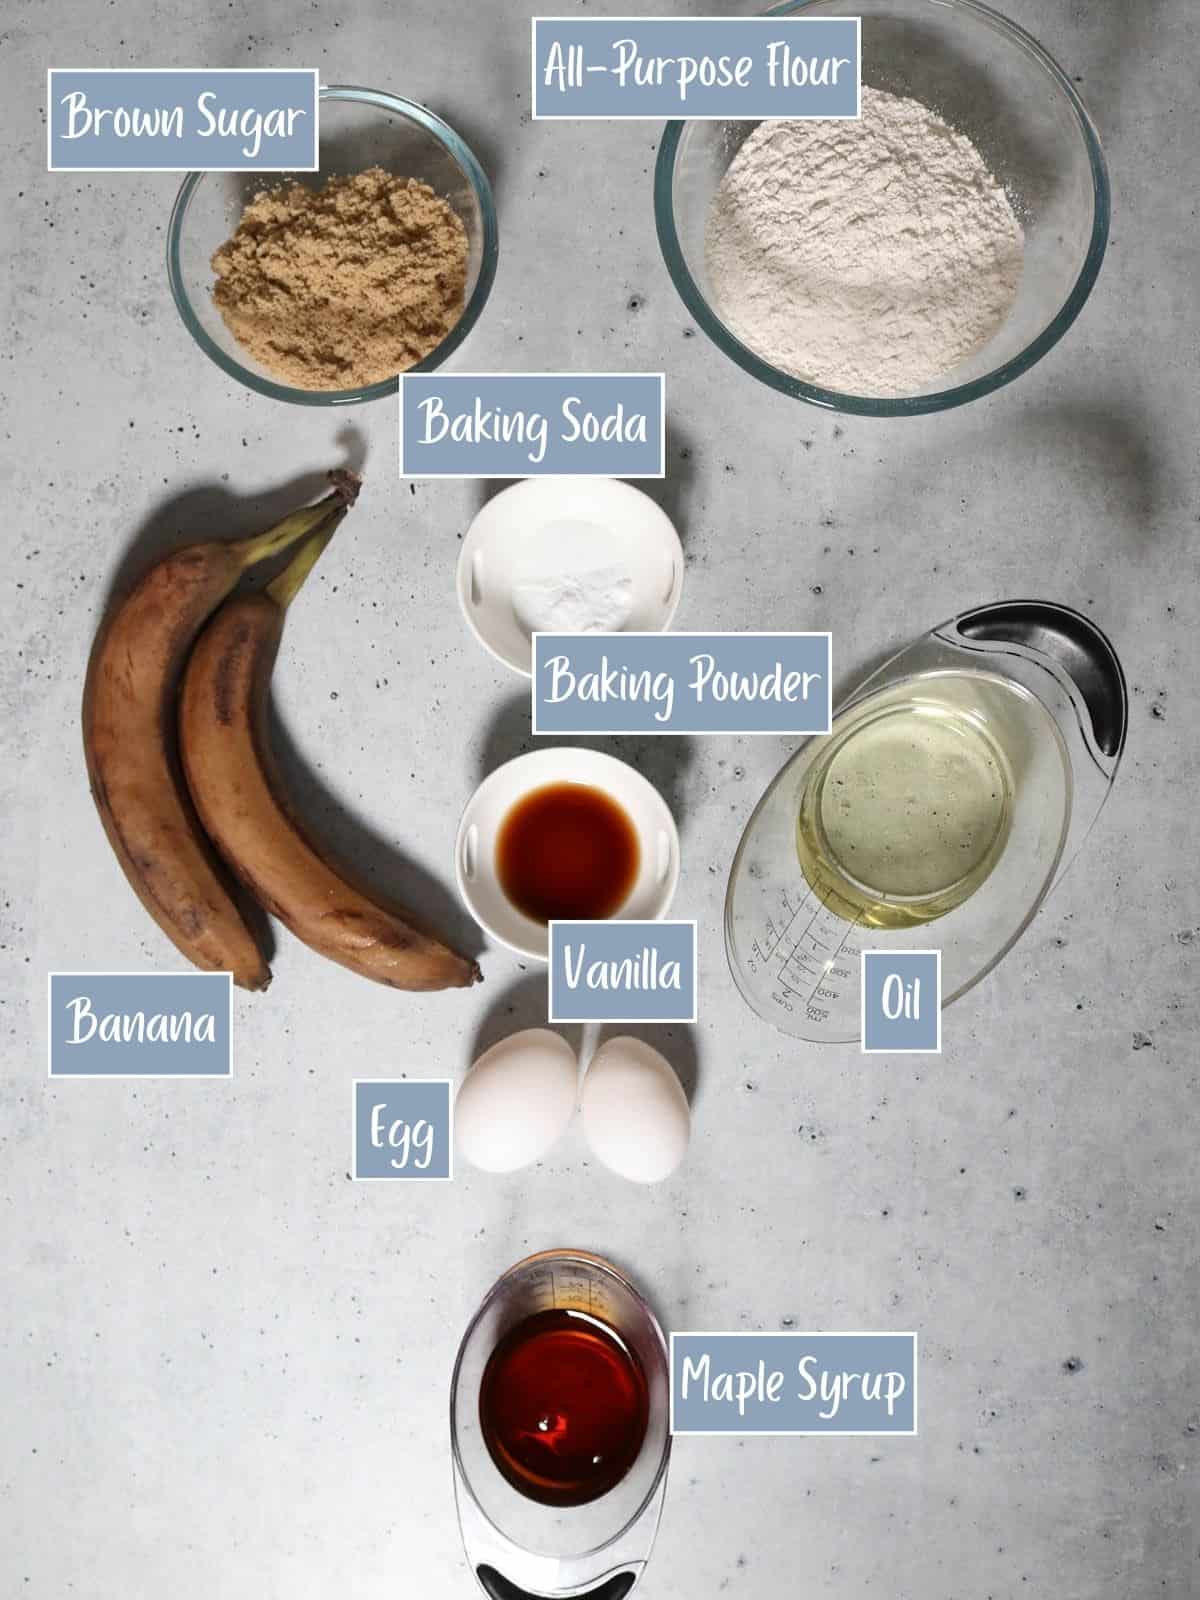 Labeled ingredients for banana bread.